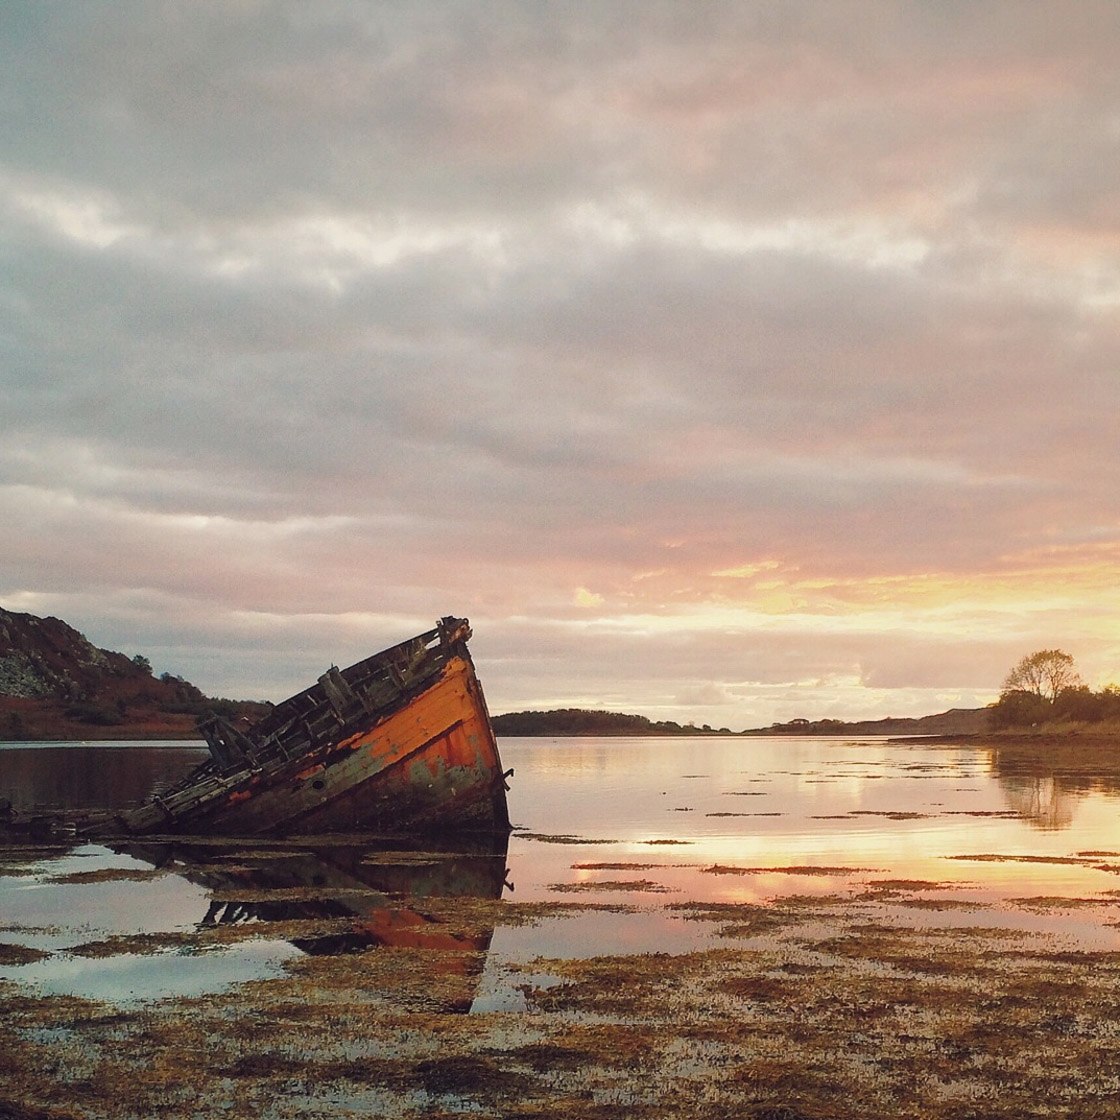 8 Tips For Breathtaking Landscape Photography On Your iPhone